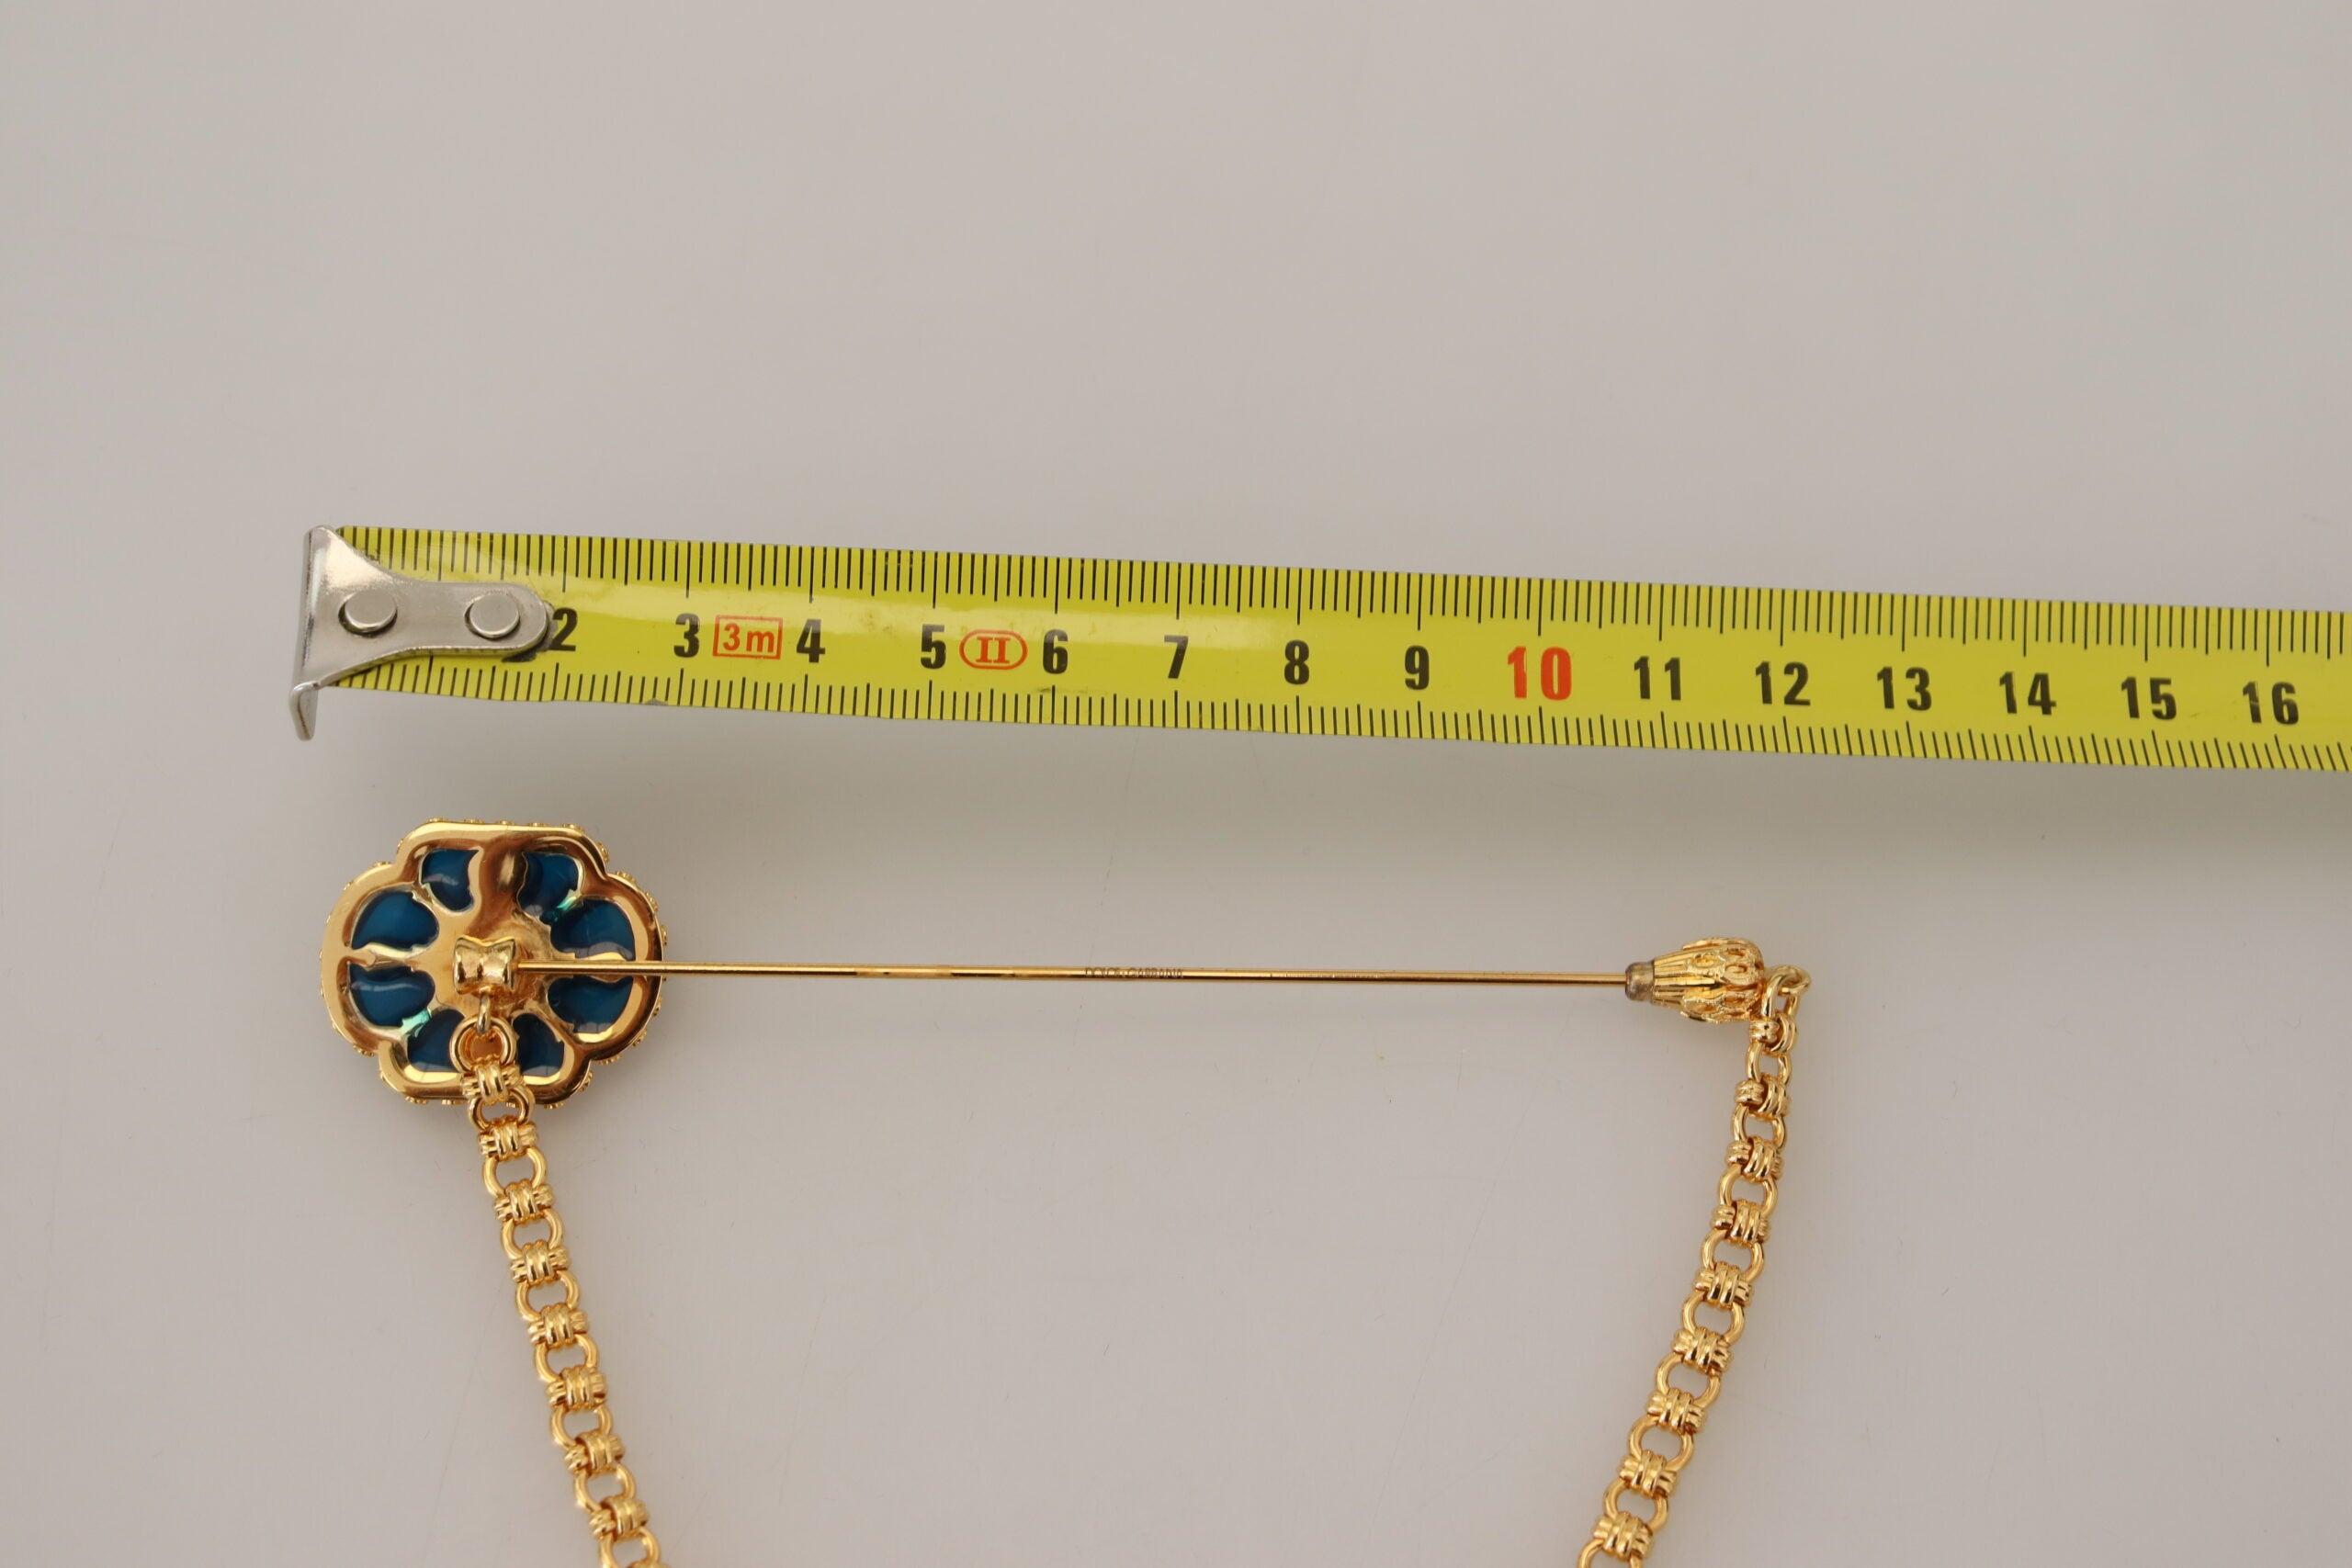 Crown stick pin brooch in yellow and white gold with curly gold